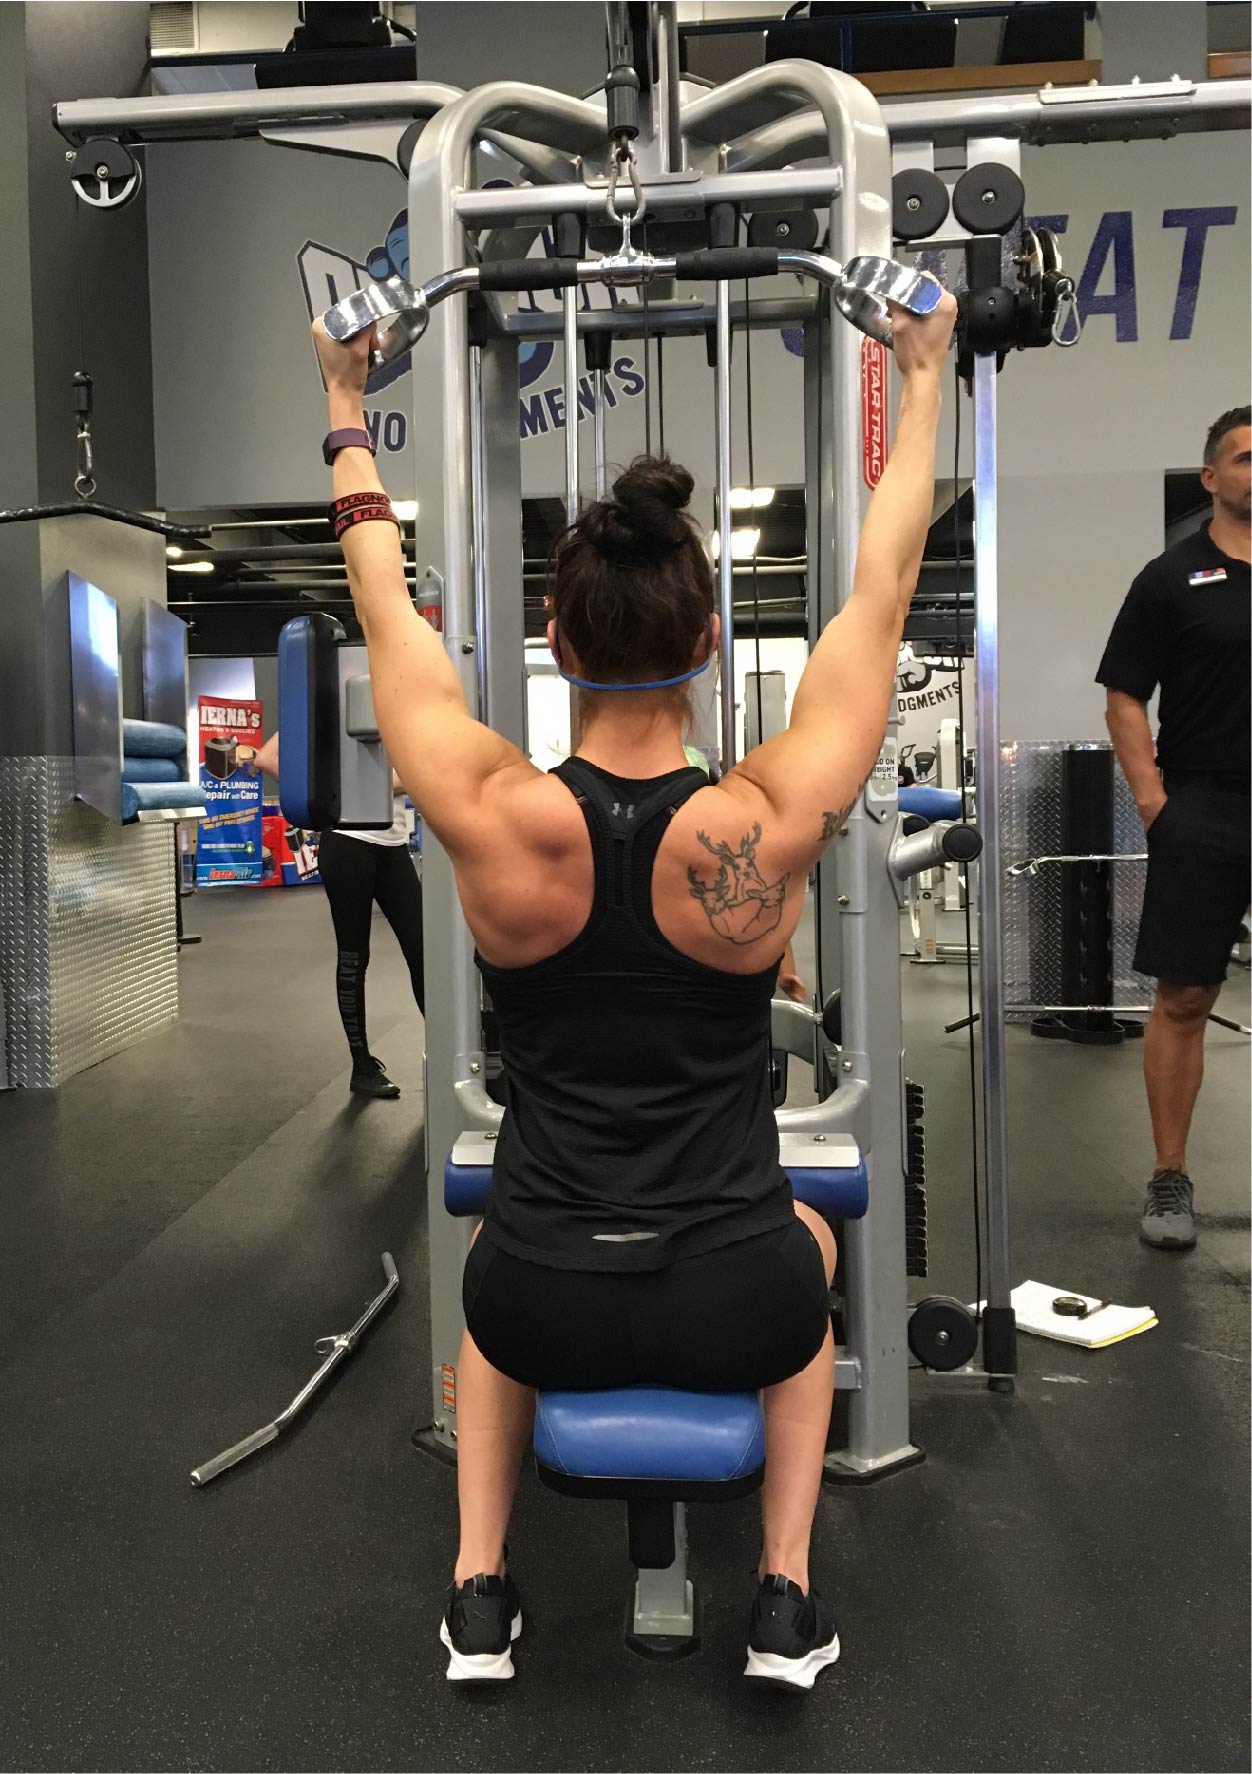 30 Minute Lat Pulldown Variations And Muscles Worked for Weight Loss